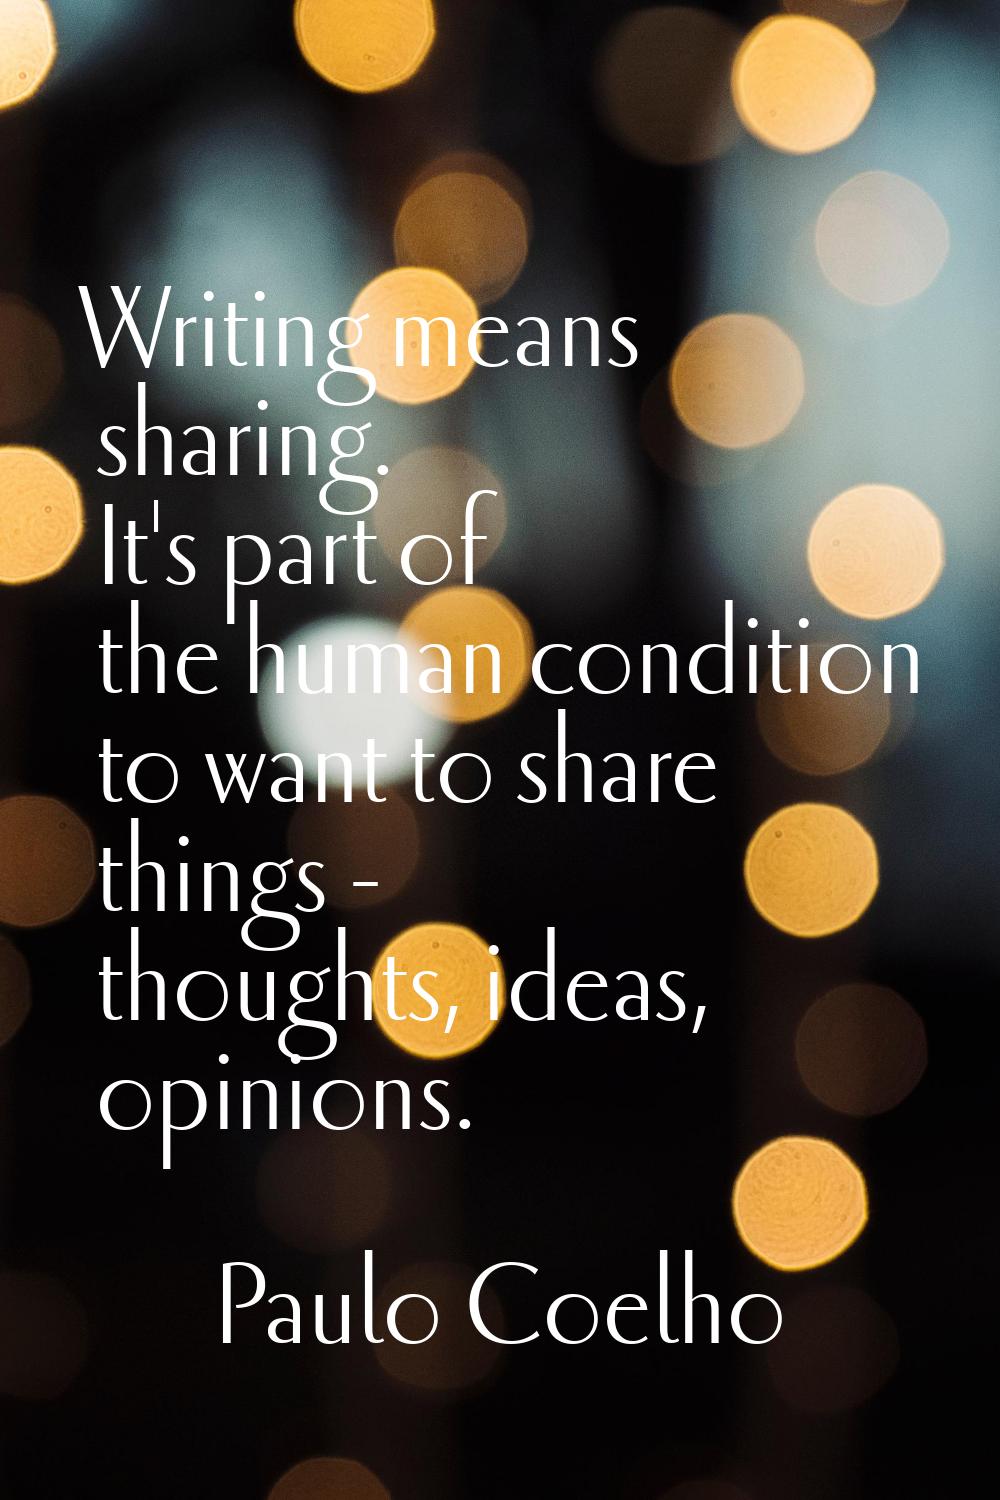 Writing means sharing. It's part of the human condition to want to share things - thoughts, ideas, 